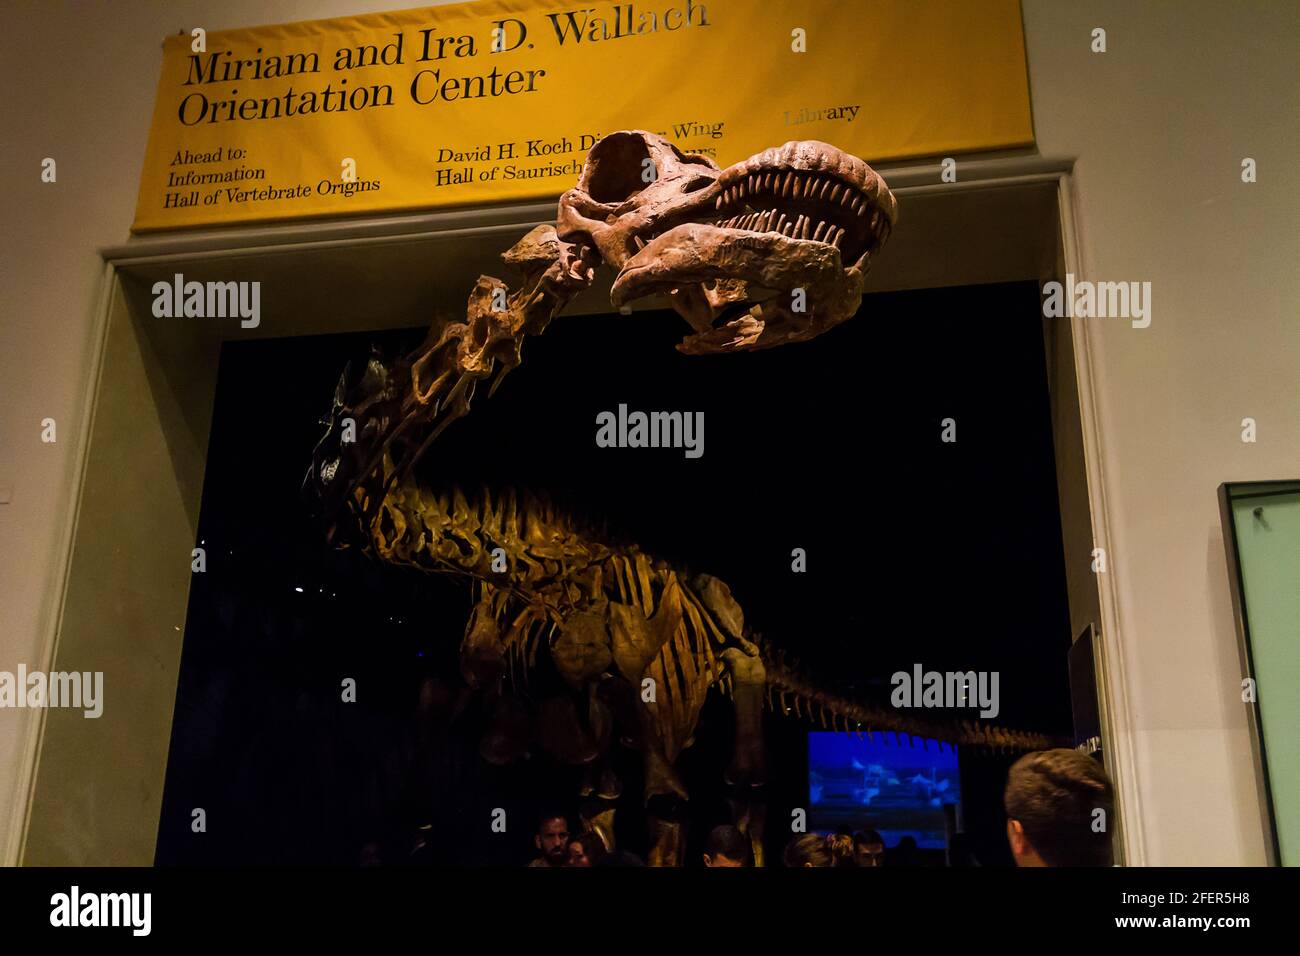 The titanosaur at the entrance of Miriam and Ira D. Wallach Orientation Center in American Museum of Natural History Stock Photo